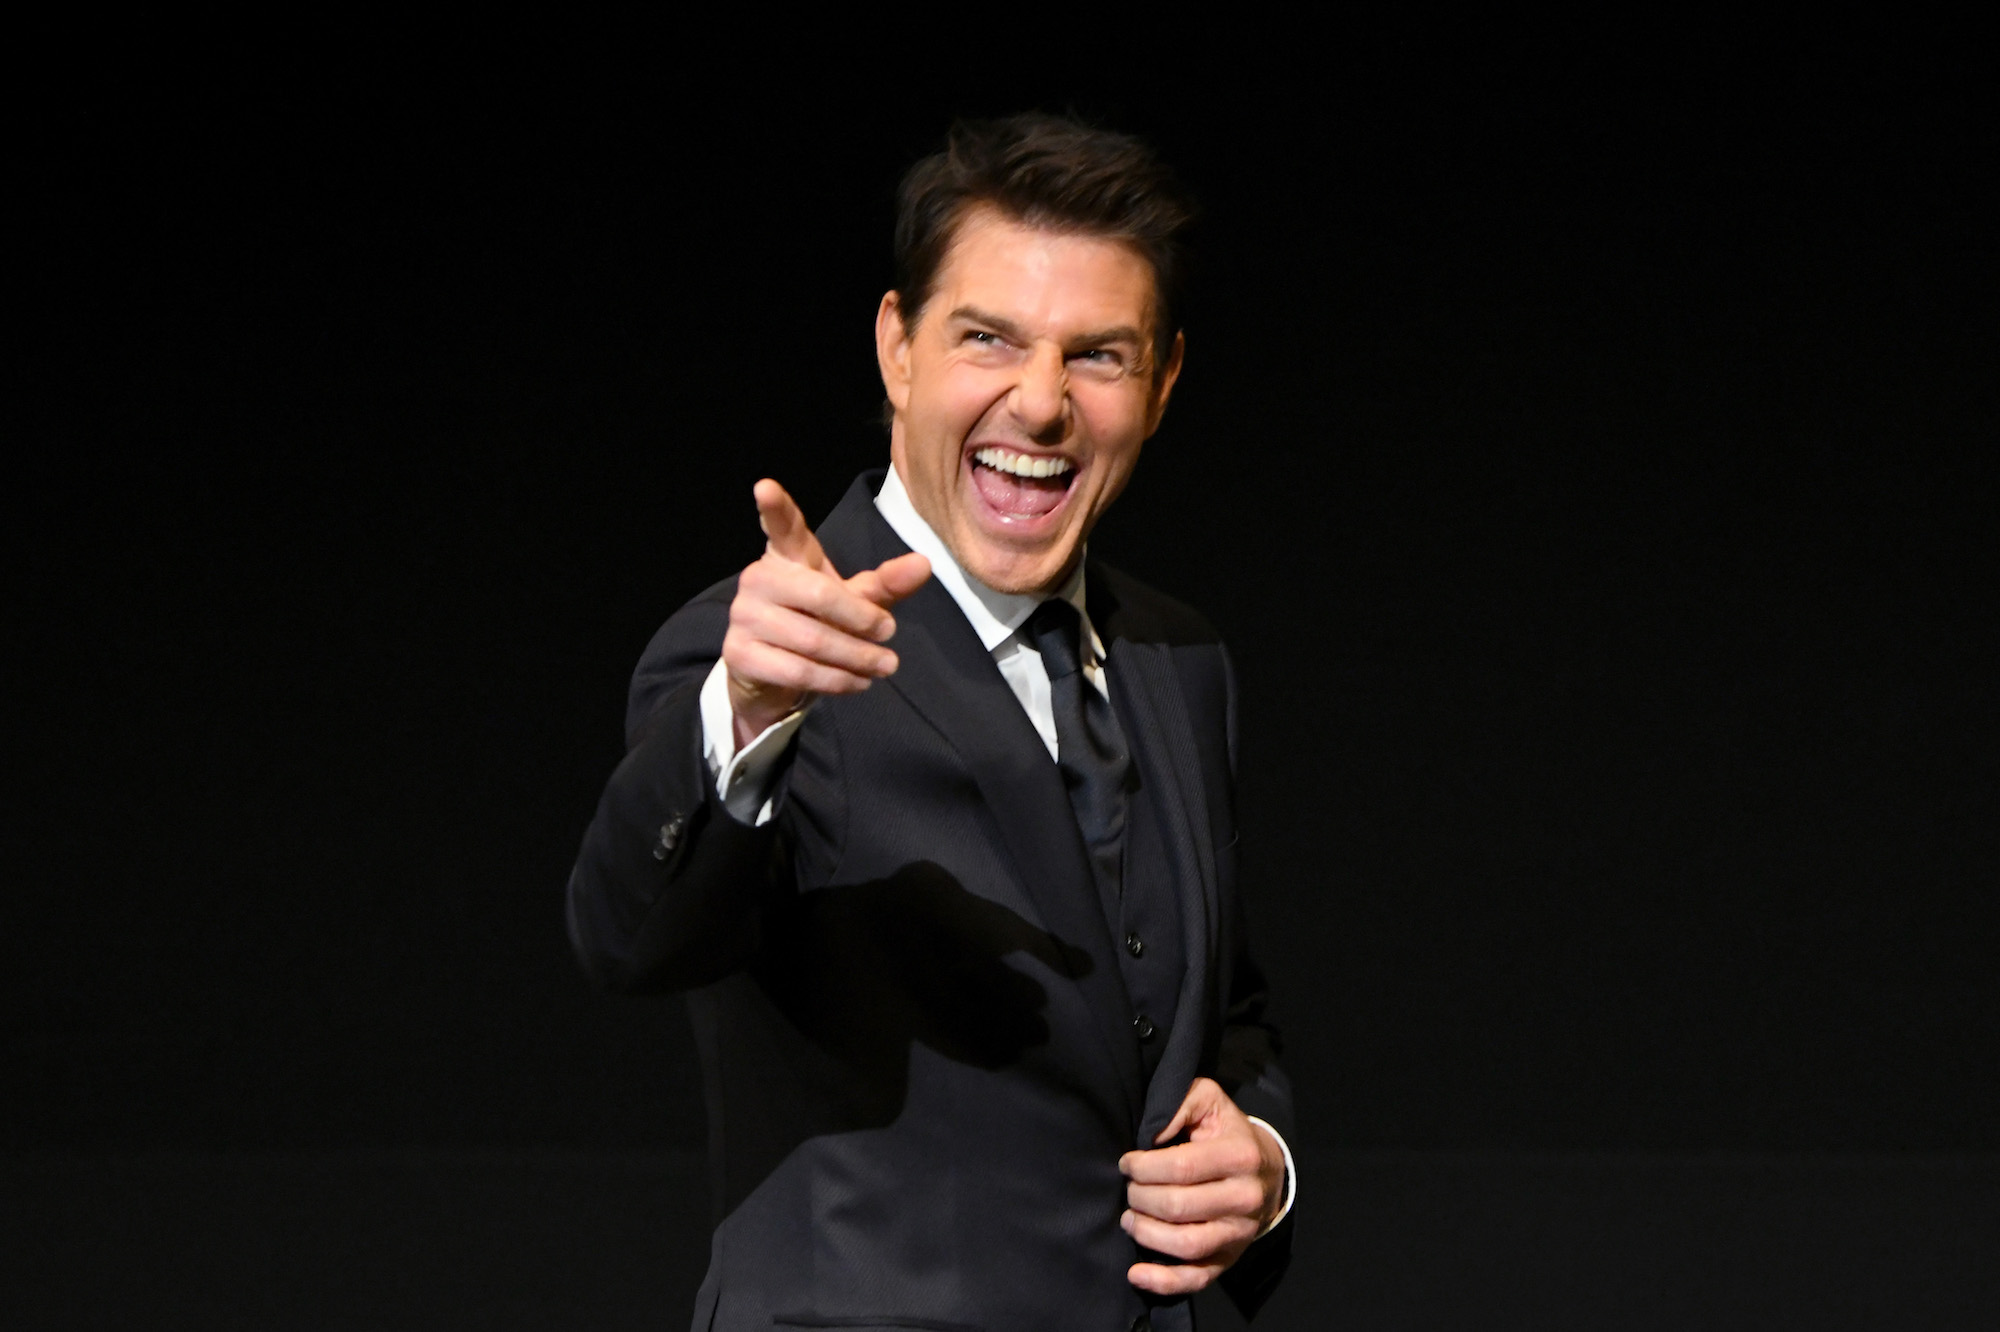 Tom-Cruise-GettyImages-1091598252.jpg